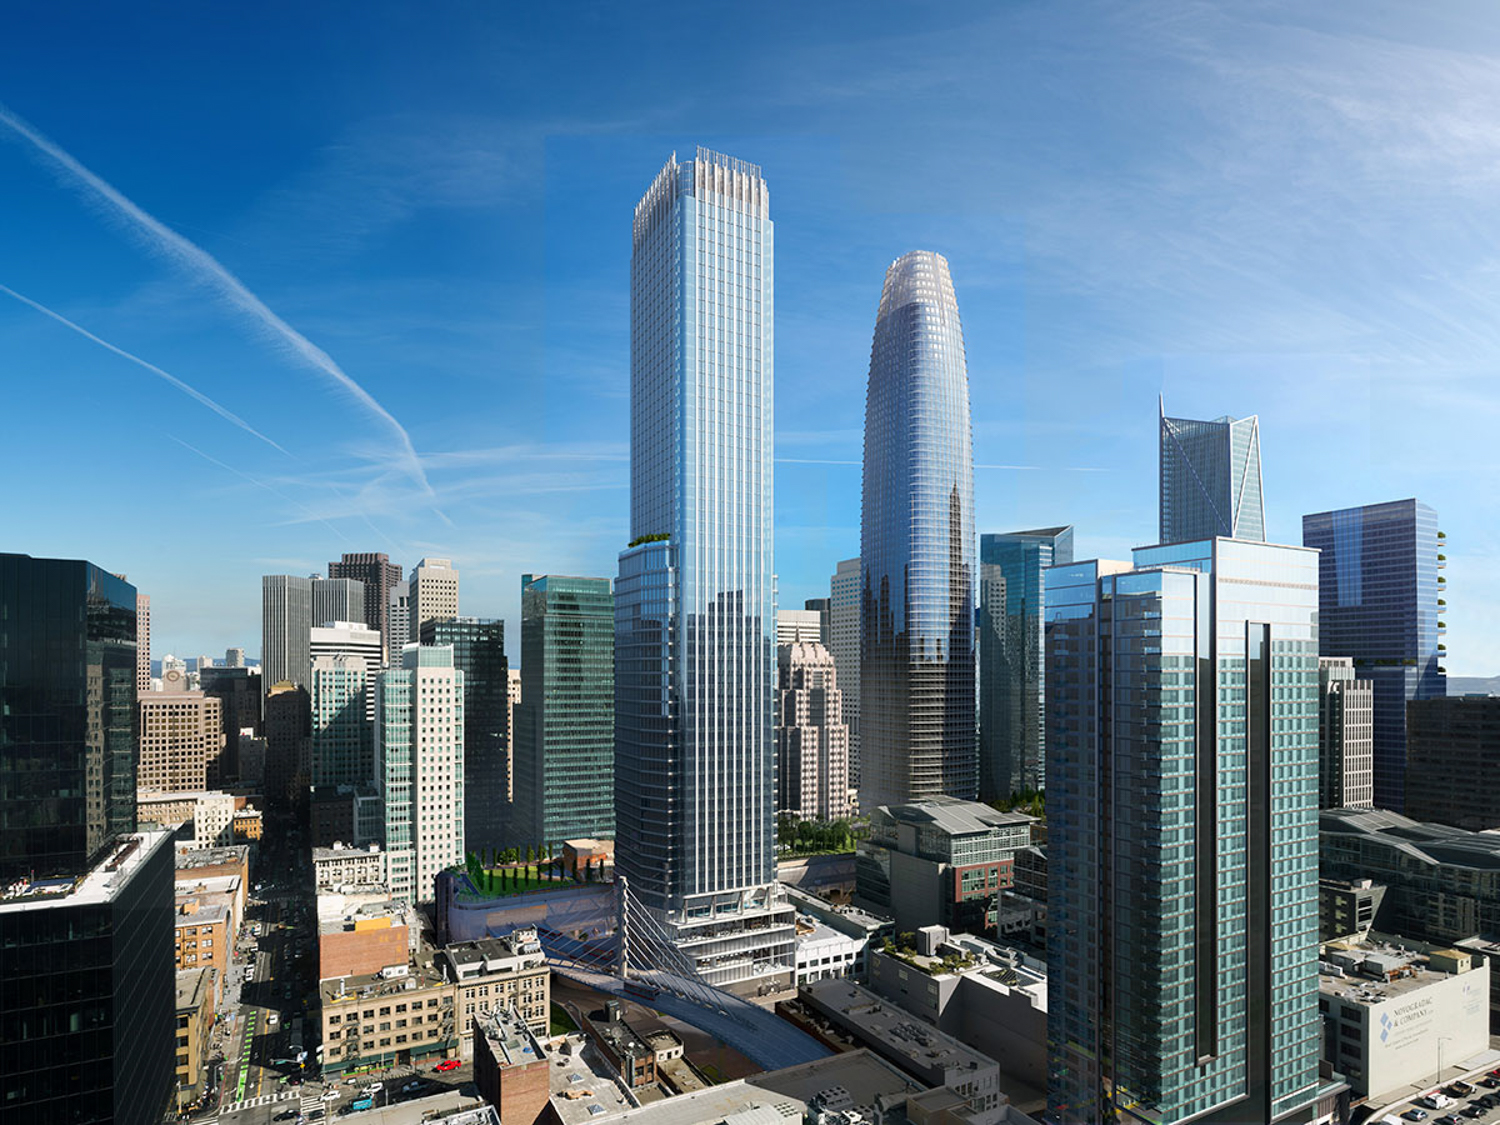 Parcel F Tower, design by Pelli Clarke Pelli with rendering by SteelBlue